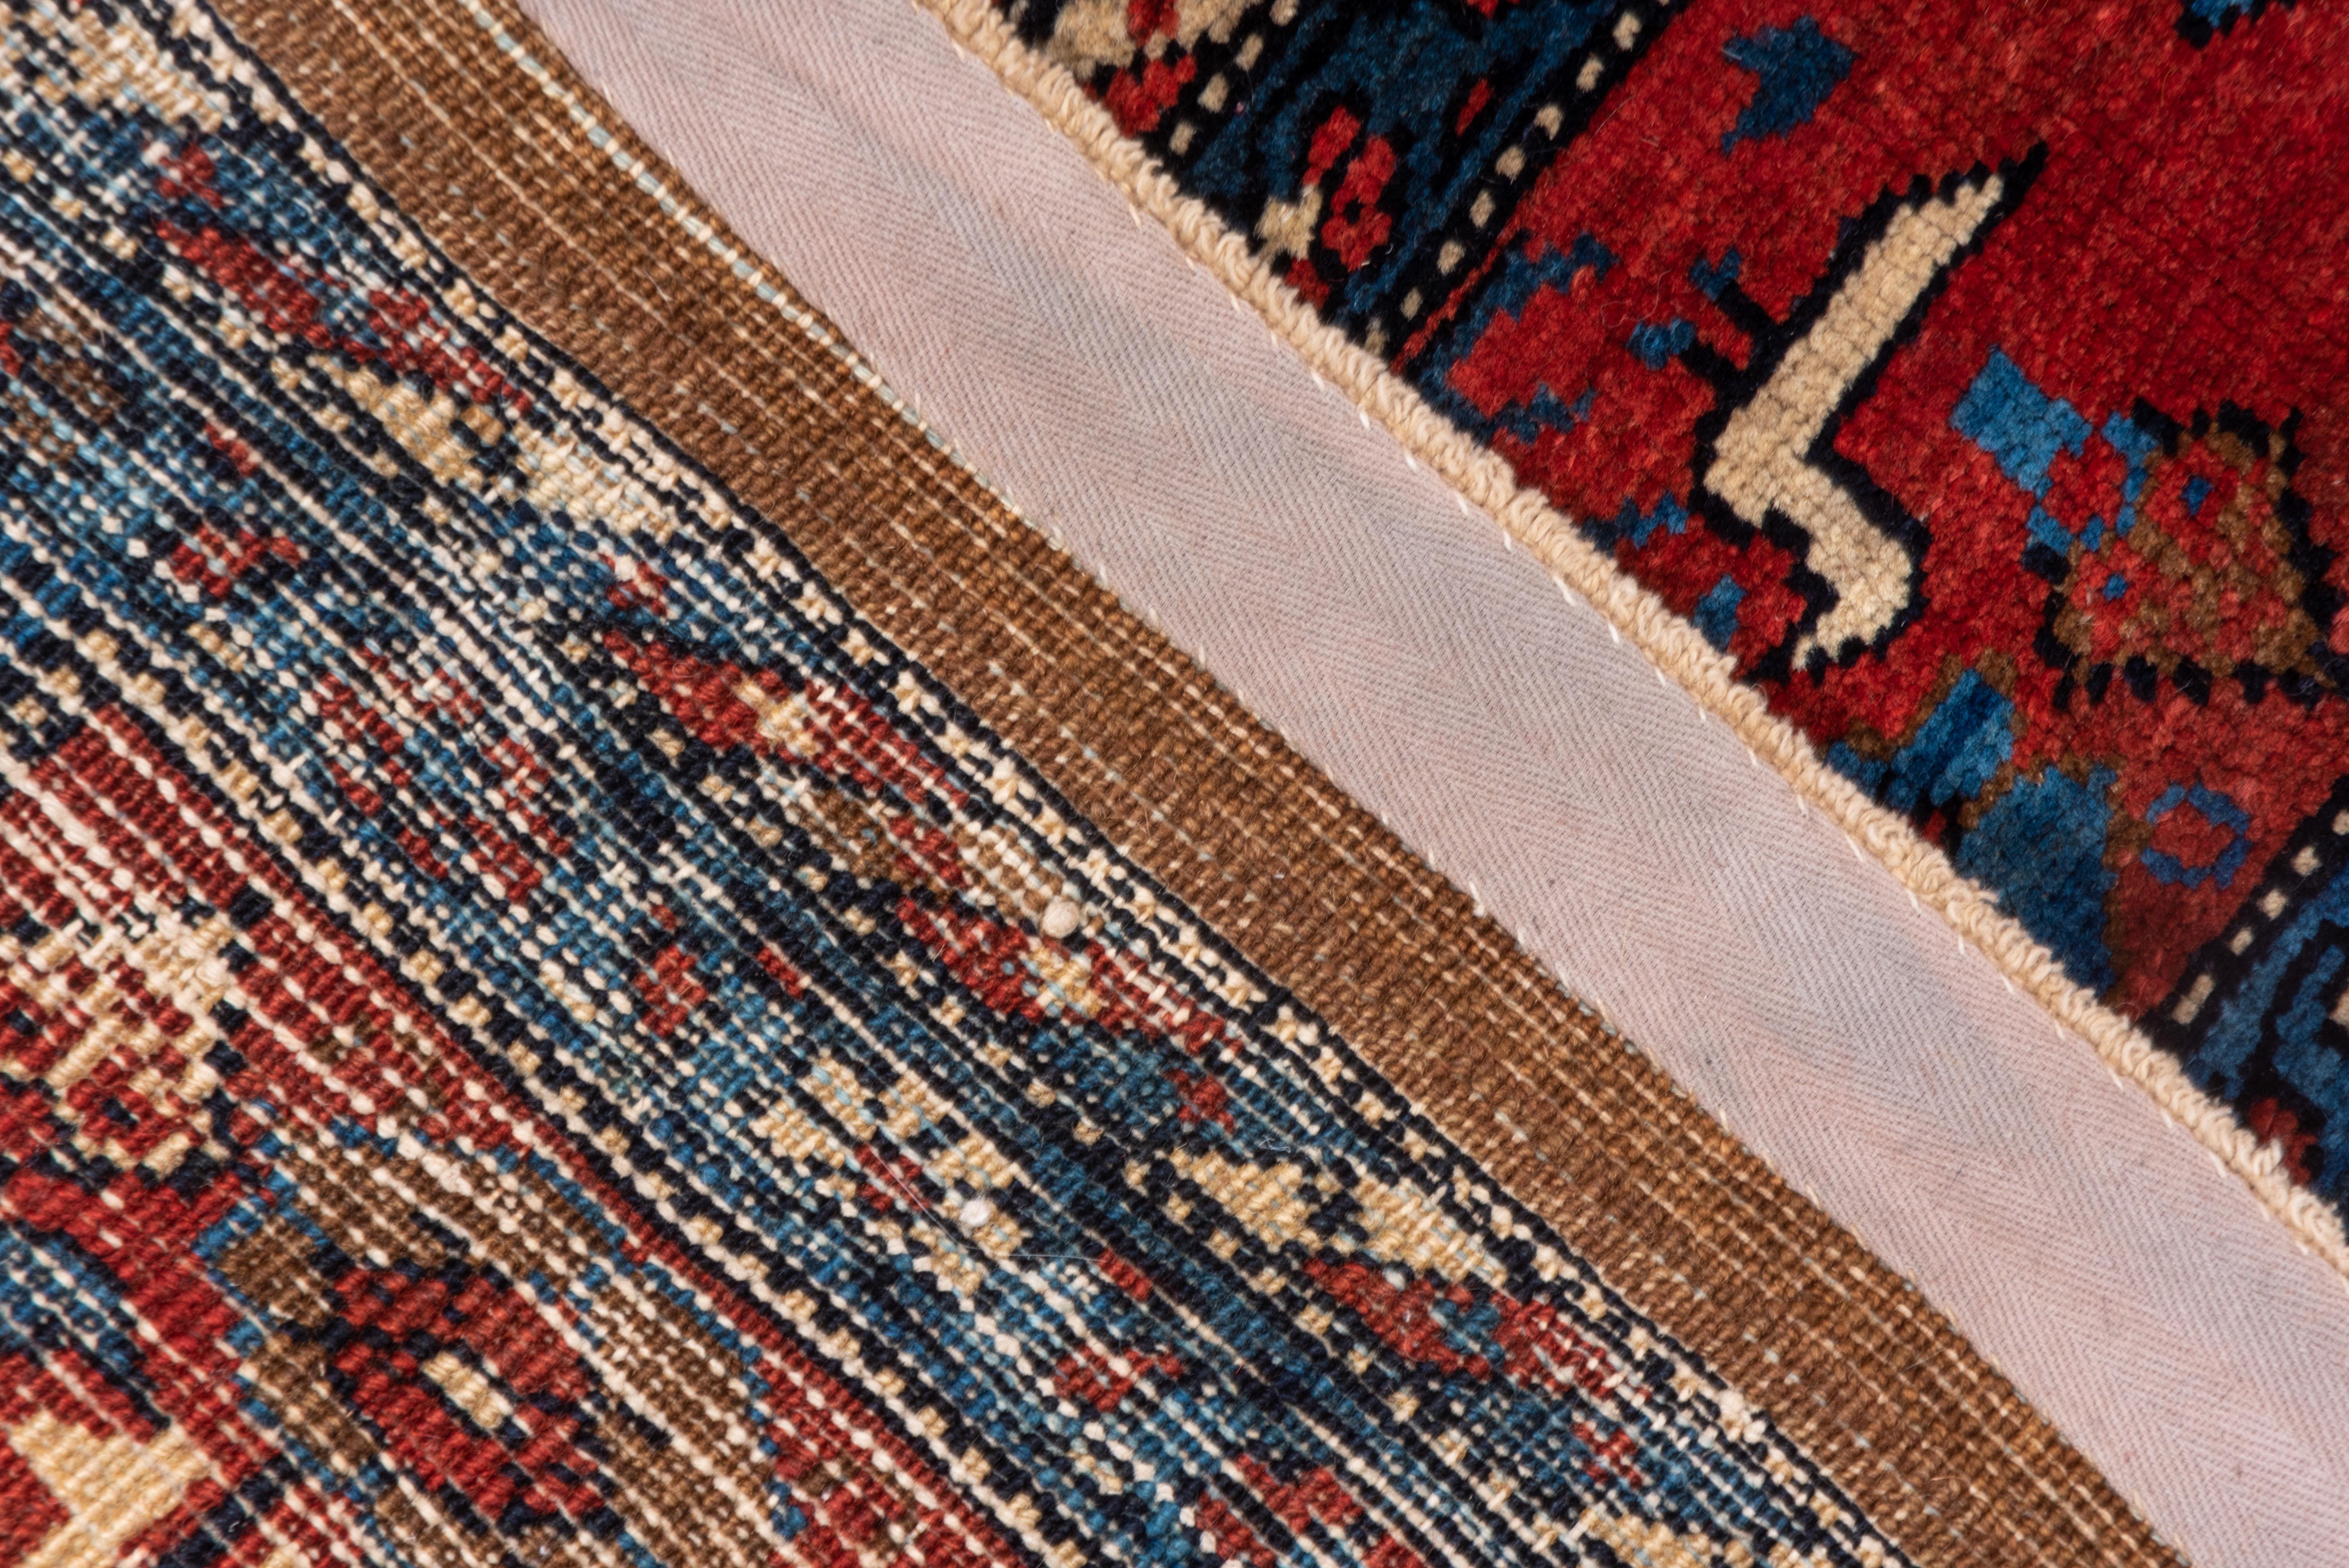 Early 20th Century Rare Antique Heriz Bakhshayesh Carpet, Brown and Rich Red Field, B For Sale